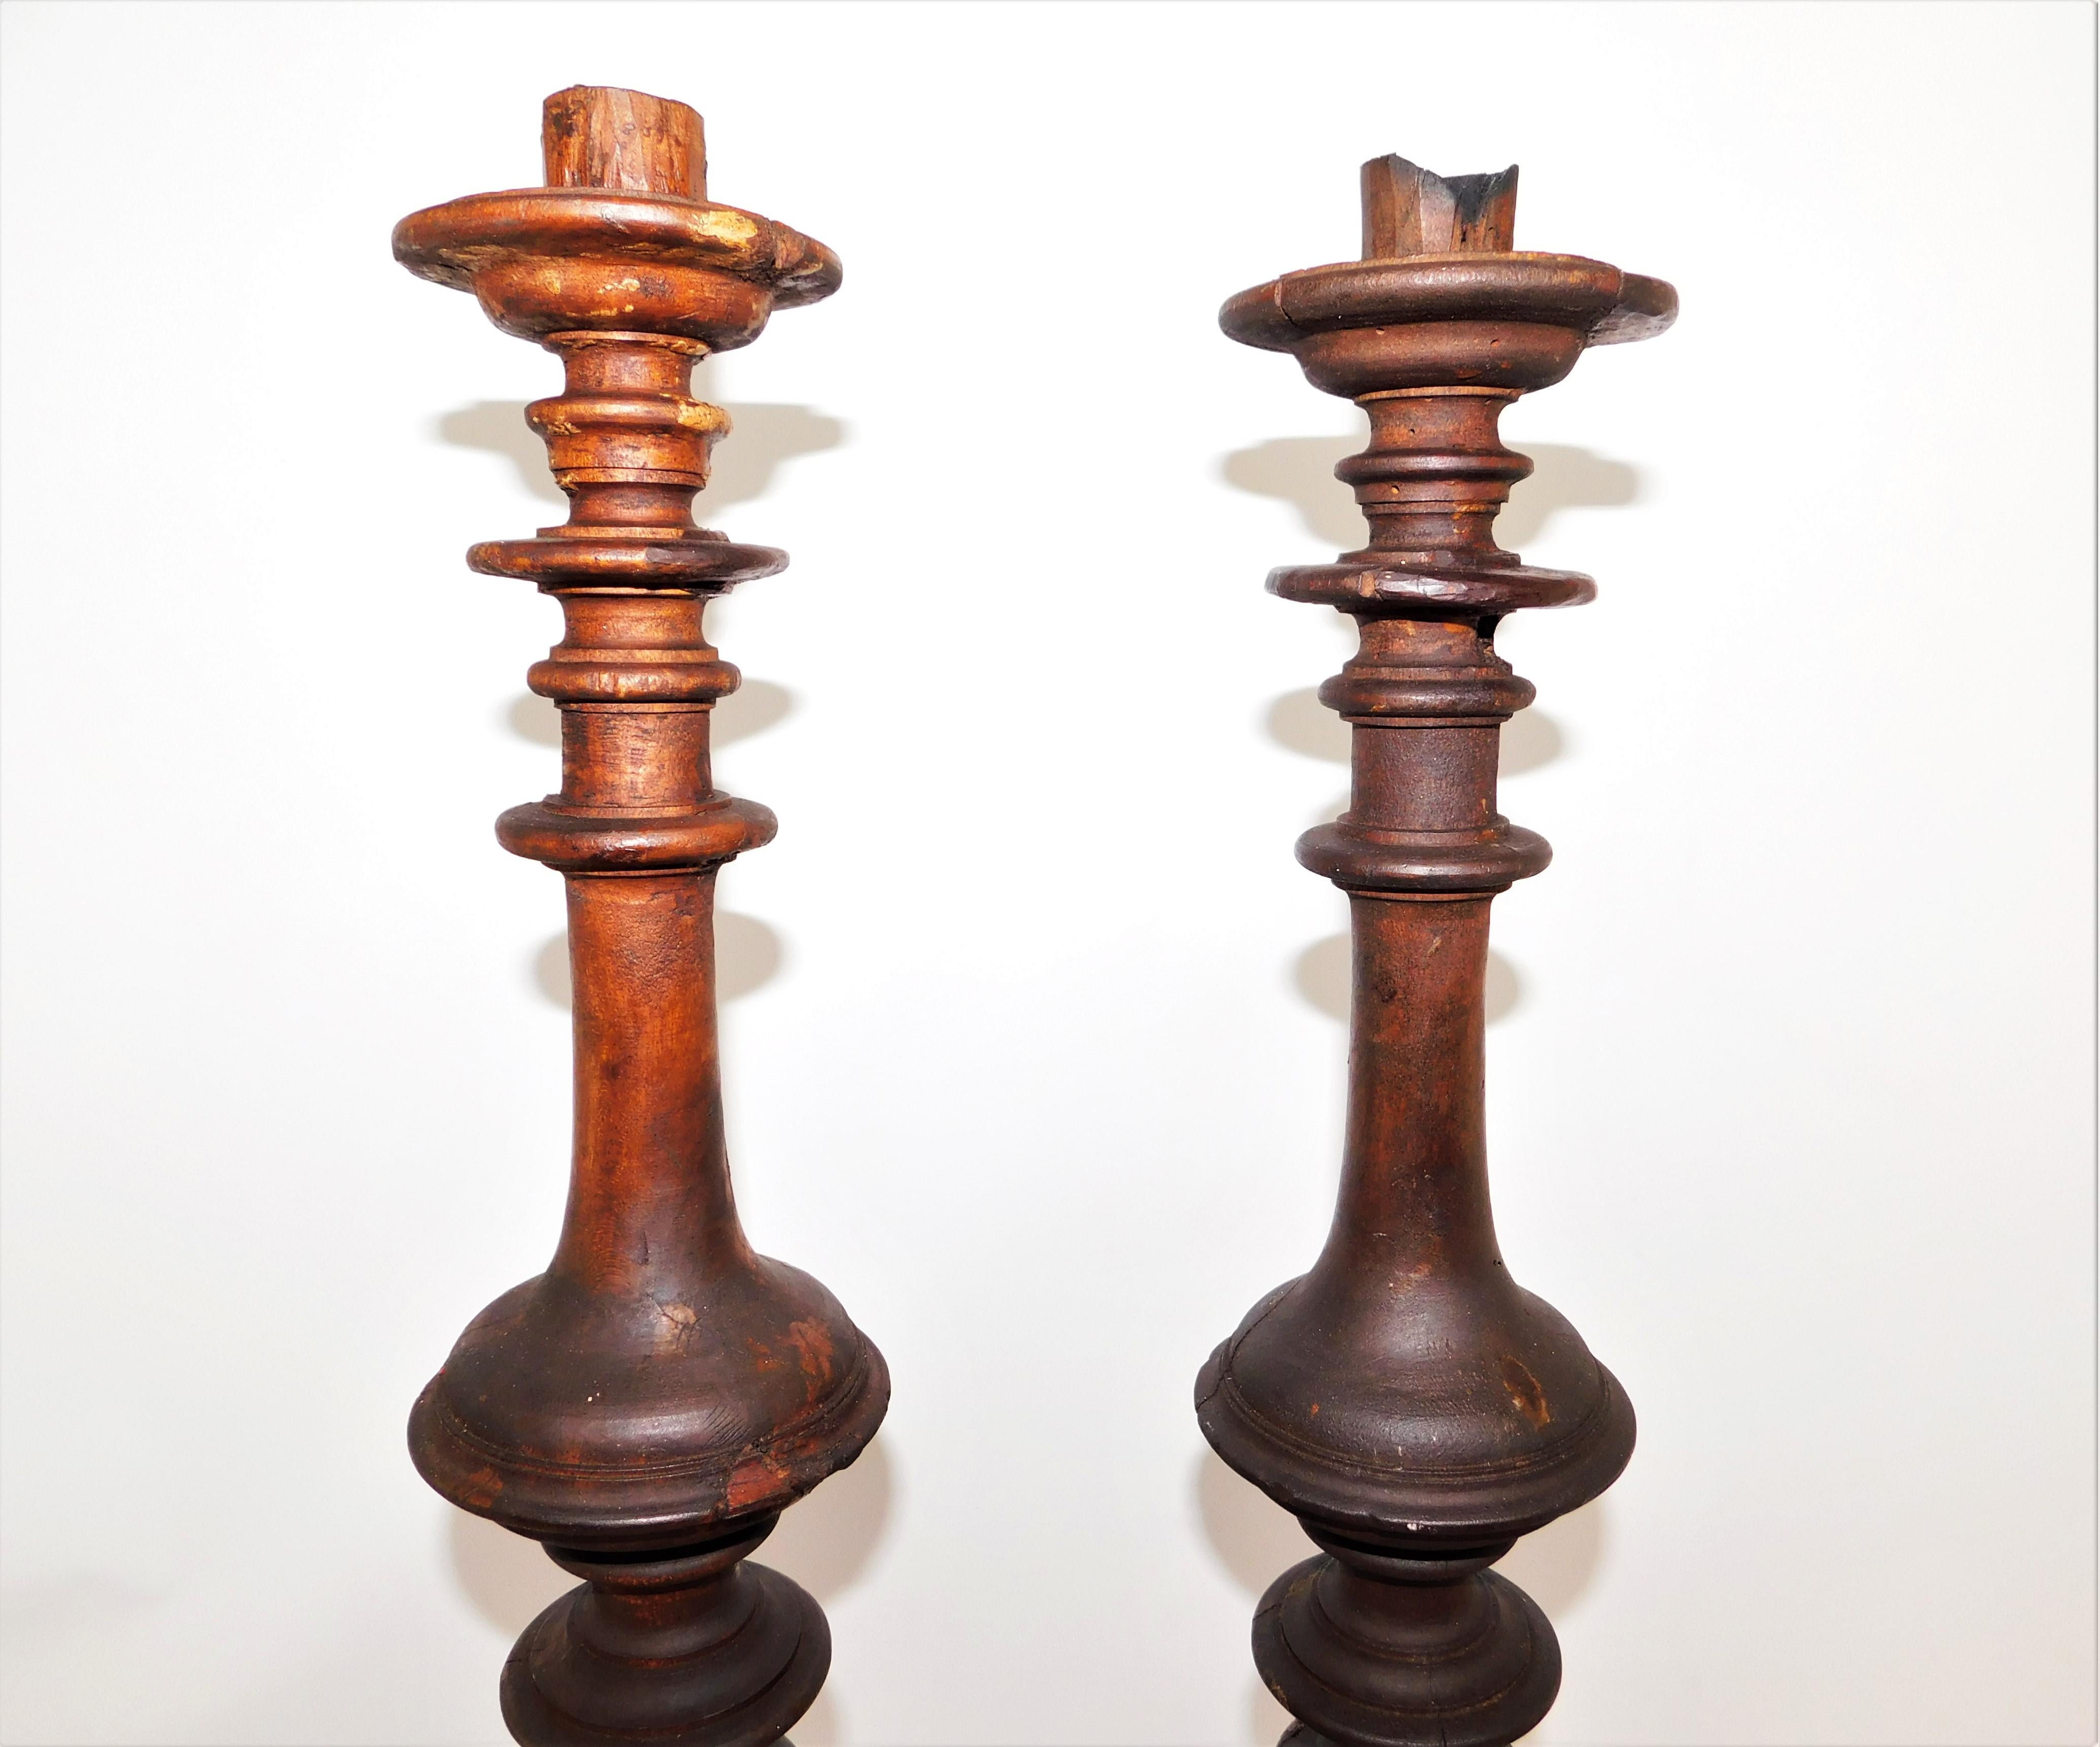 Pair of tall architectural pieces mid-19th century traditional rustic wood candlesticks. Hand carved by an unknown manufacturer, European. In original condition, wear consistent with age and use, preserving a beautiful patina of these almost 200